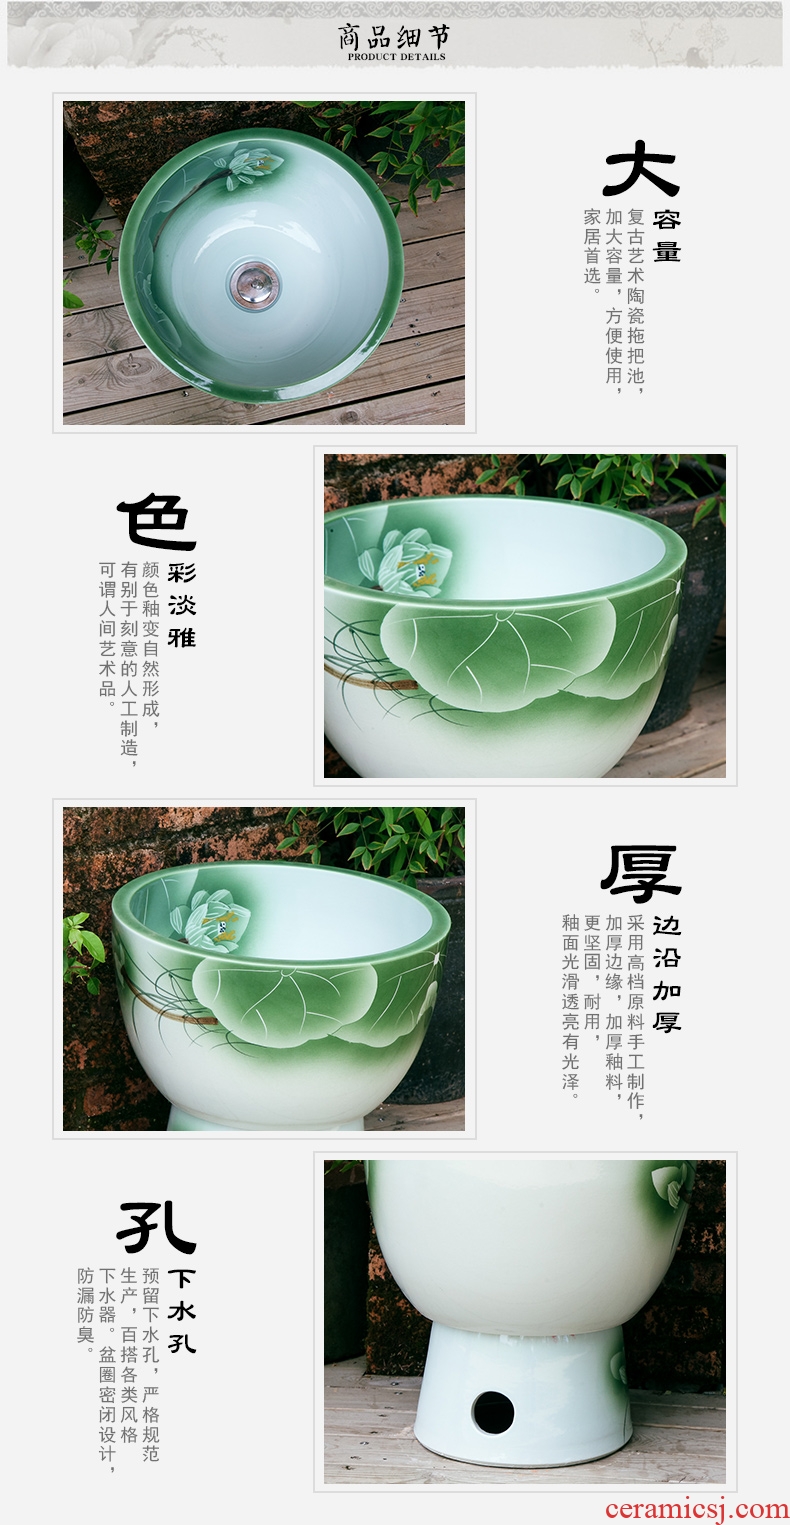 Ling yu jingdezhen art mop pool large ceramic mop pool is suing one Chinese wind pool table of type restoring ancient ways